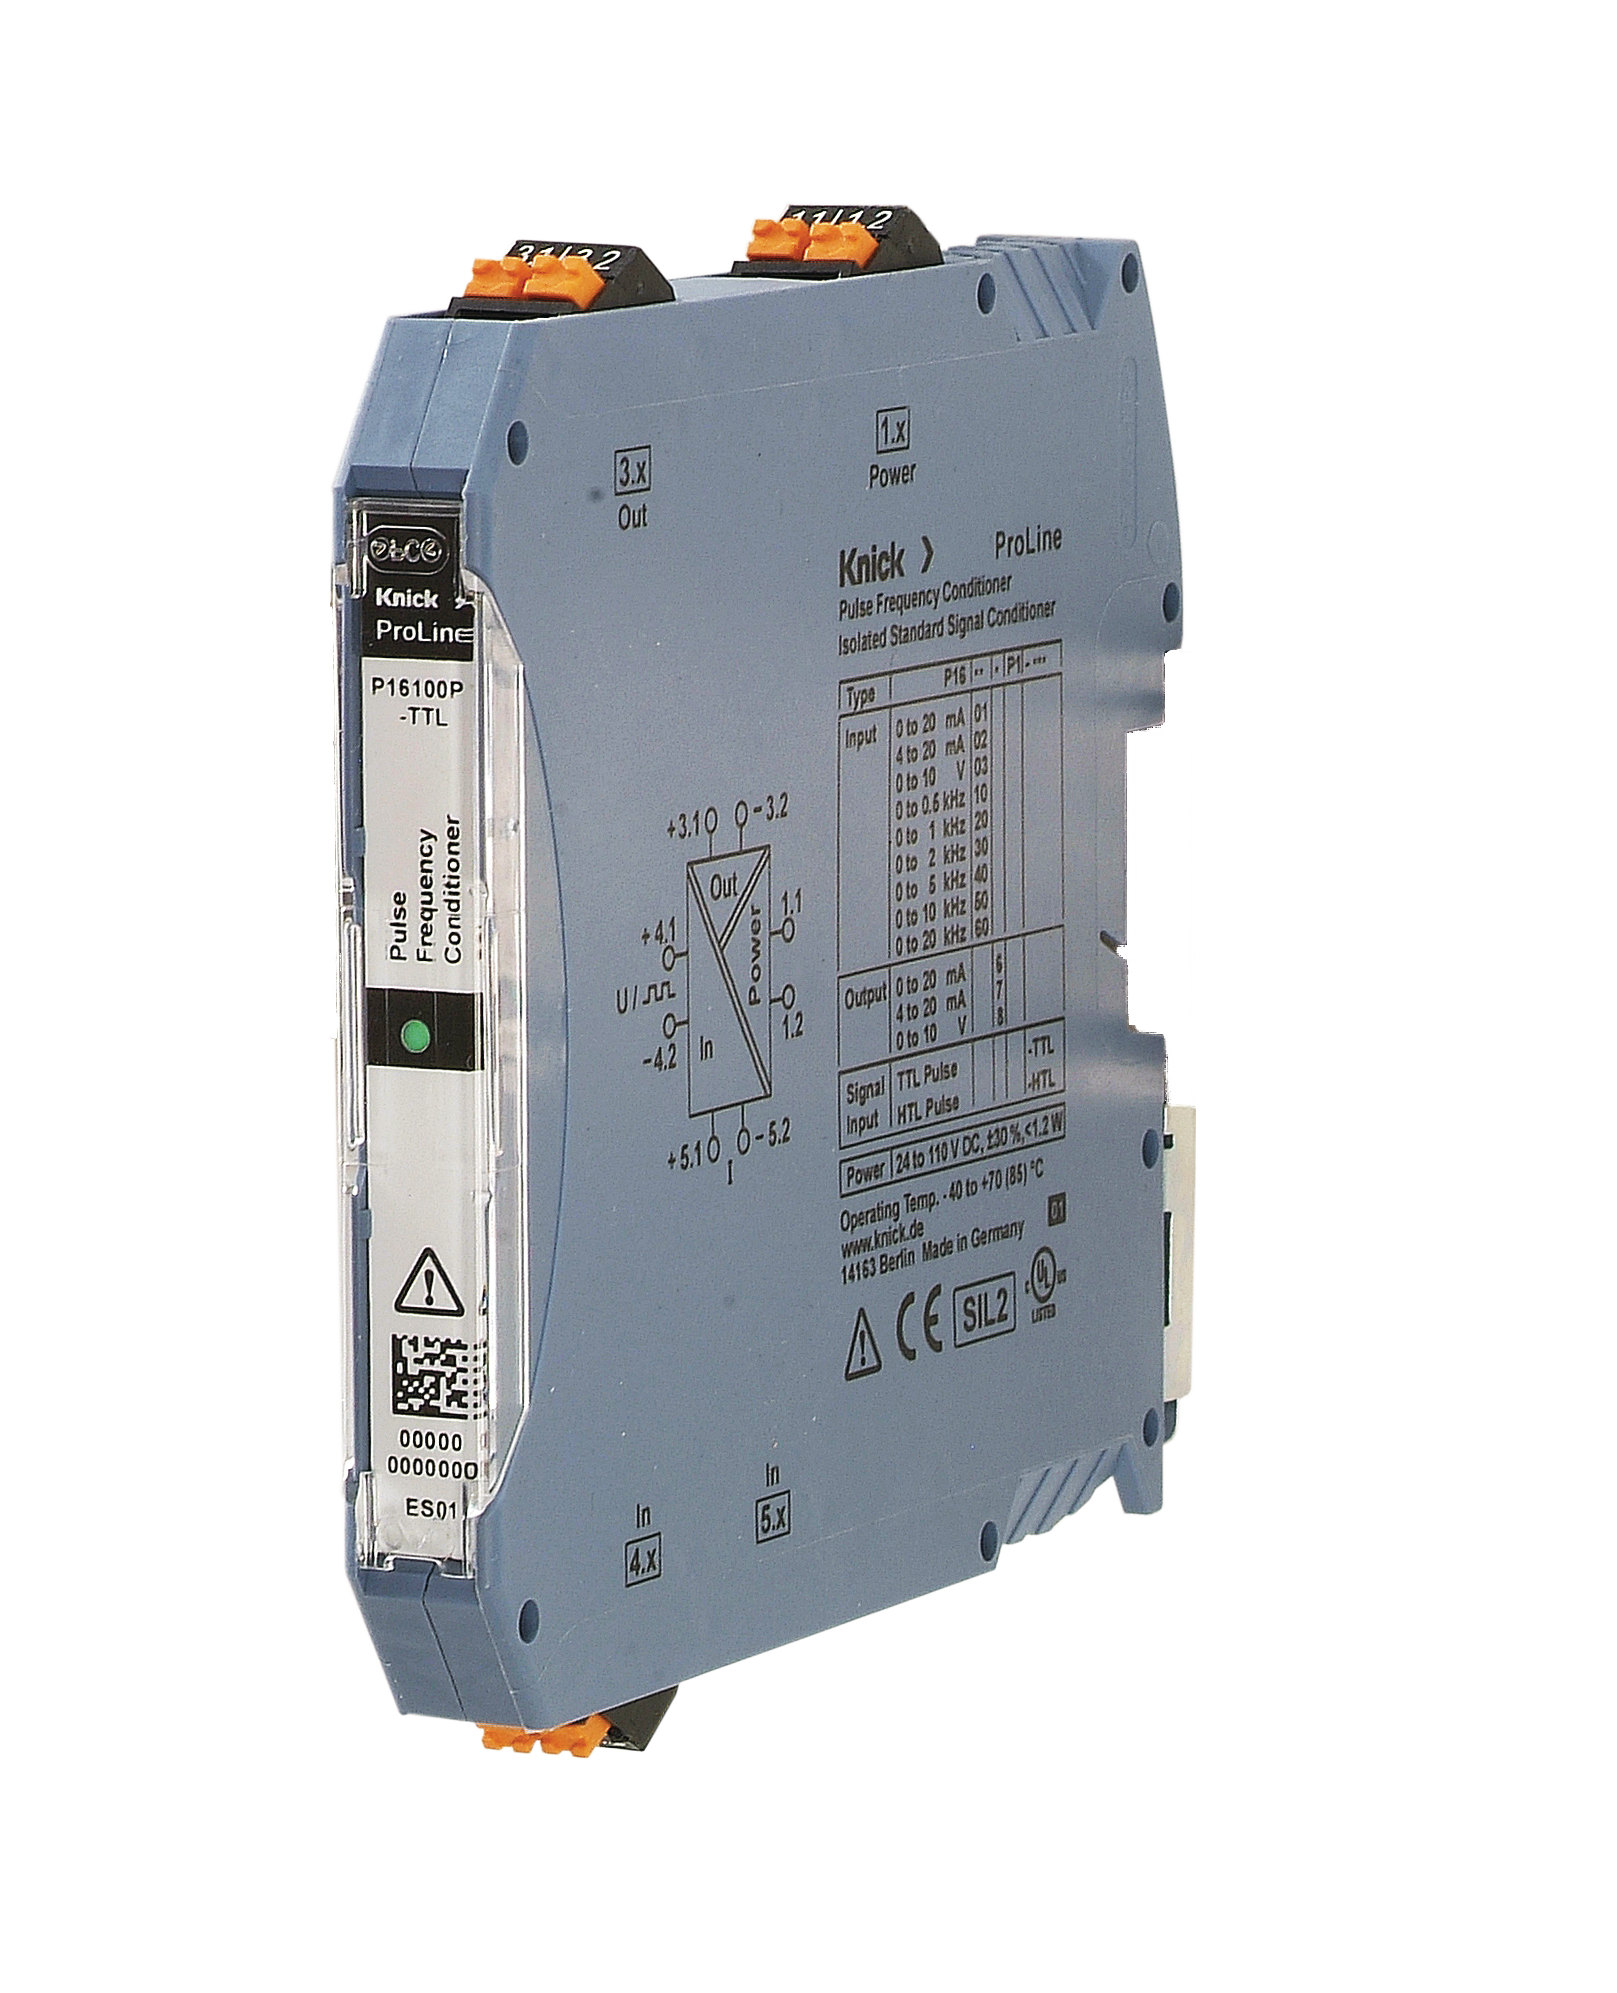 P16000 Pulse Frequency Conditioner | Input speed sensor signal up to 20kHz | Safe decoupling acc. SIL3